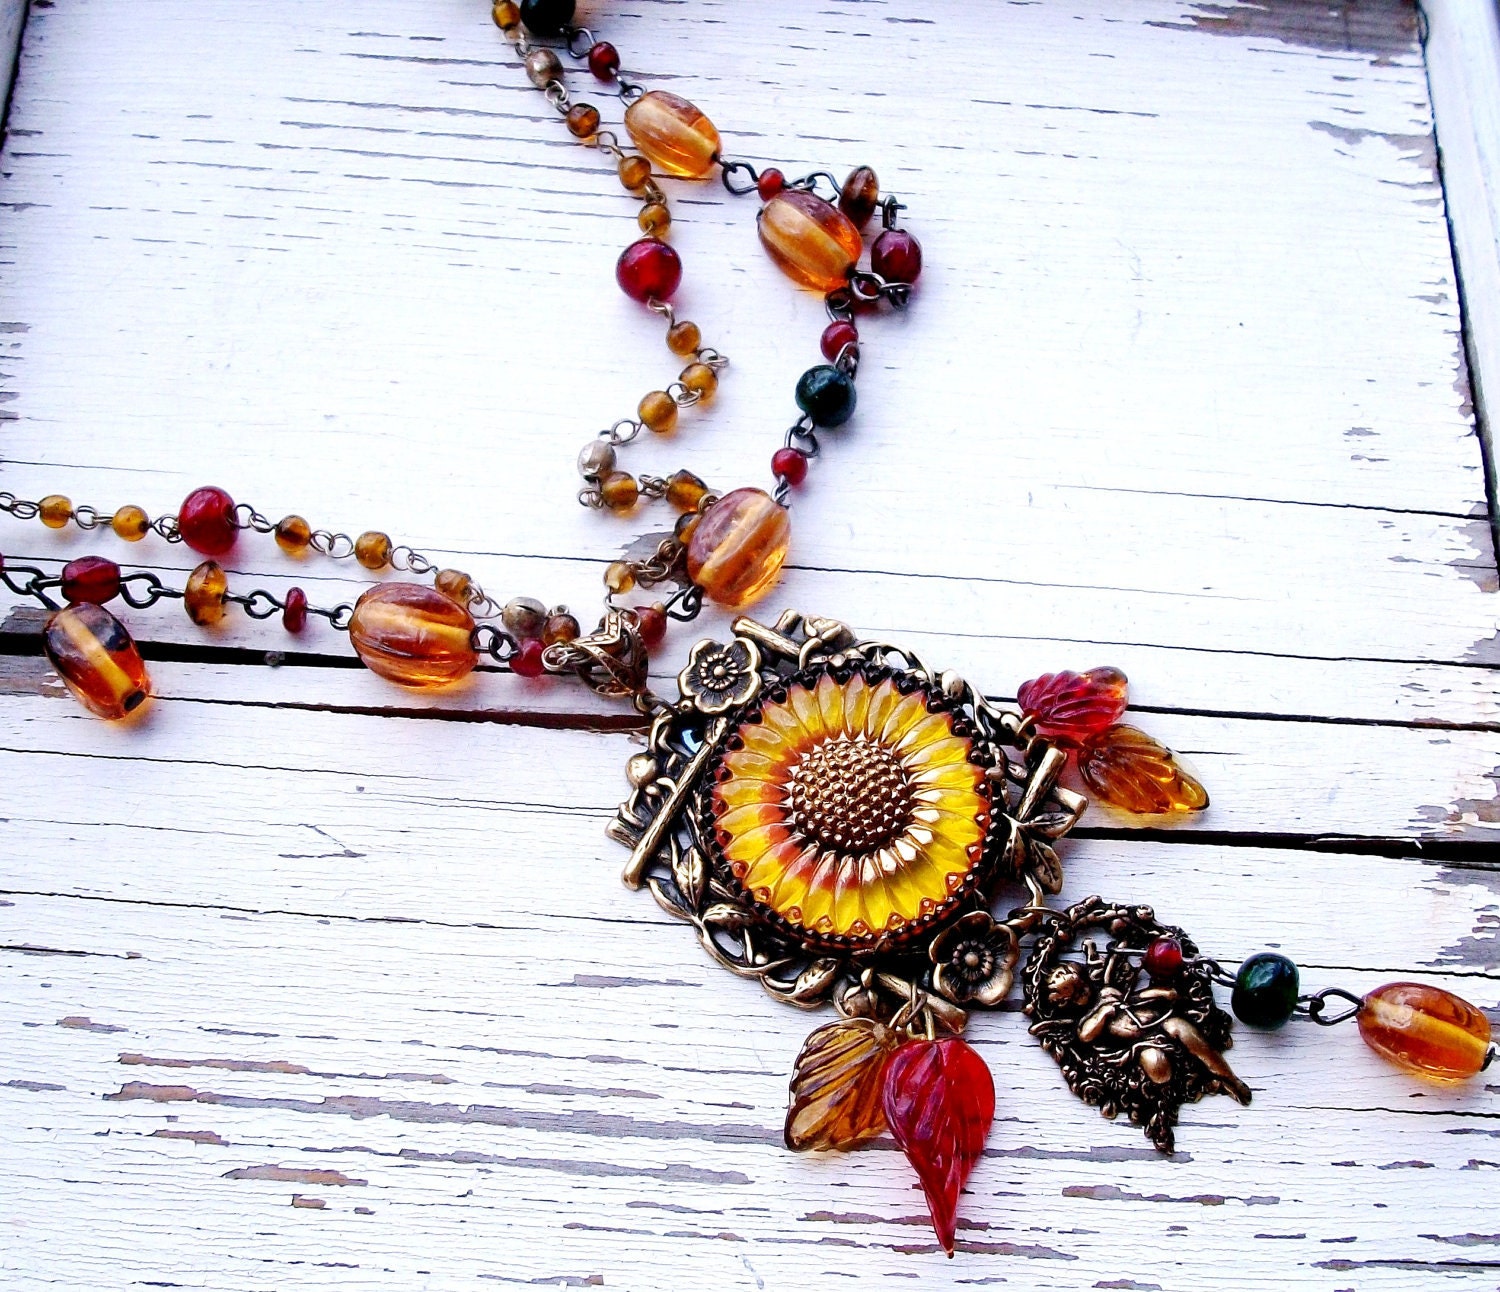 OOAK Handmade GLASS Beaded NECKLACE - "Autumn Harvest" - Dbl Chain, Fall Colors, Sunflower, Woodland, Rustic, Artisan, Wearable Art, Leaves